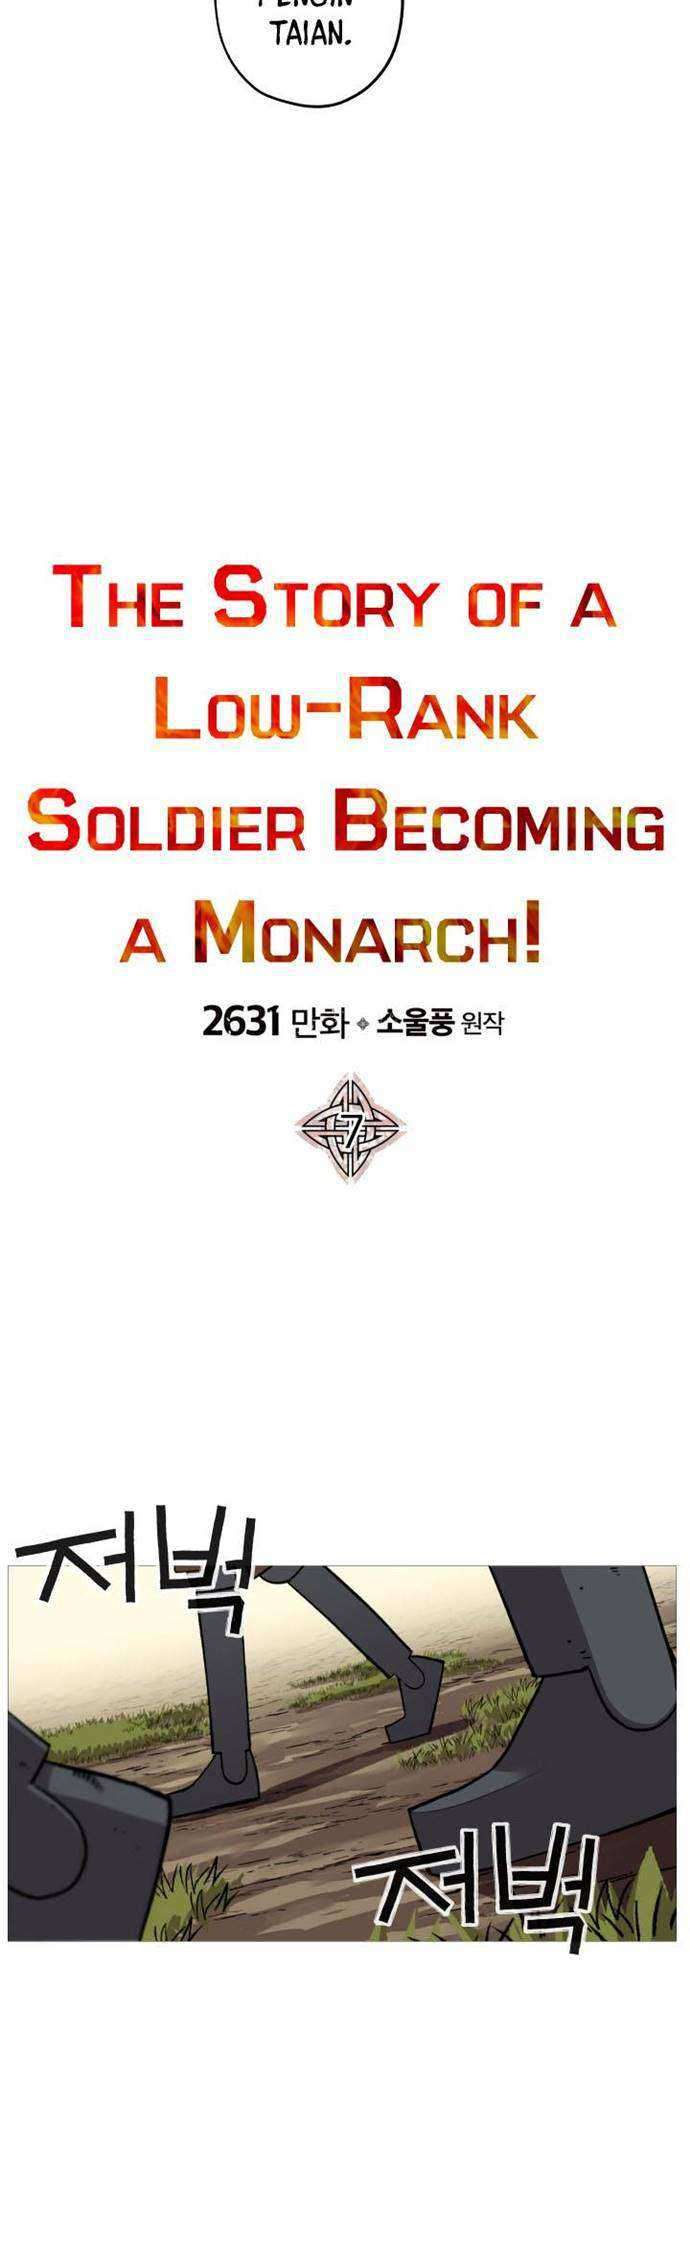 The Story of a Low-Rank Soldier Becoming a Monarch Chapter 07